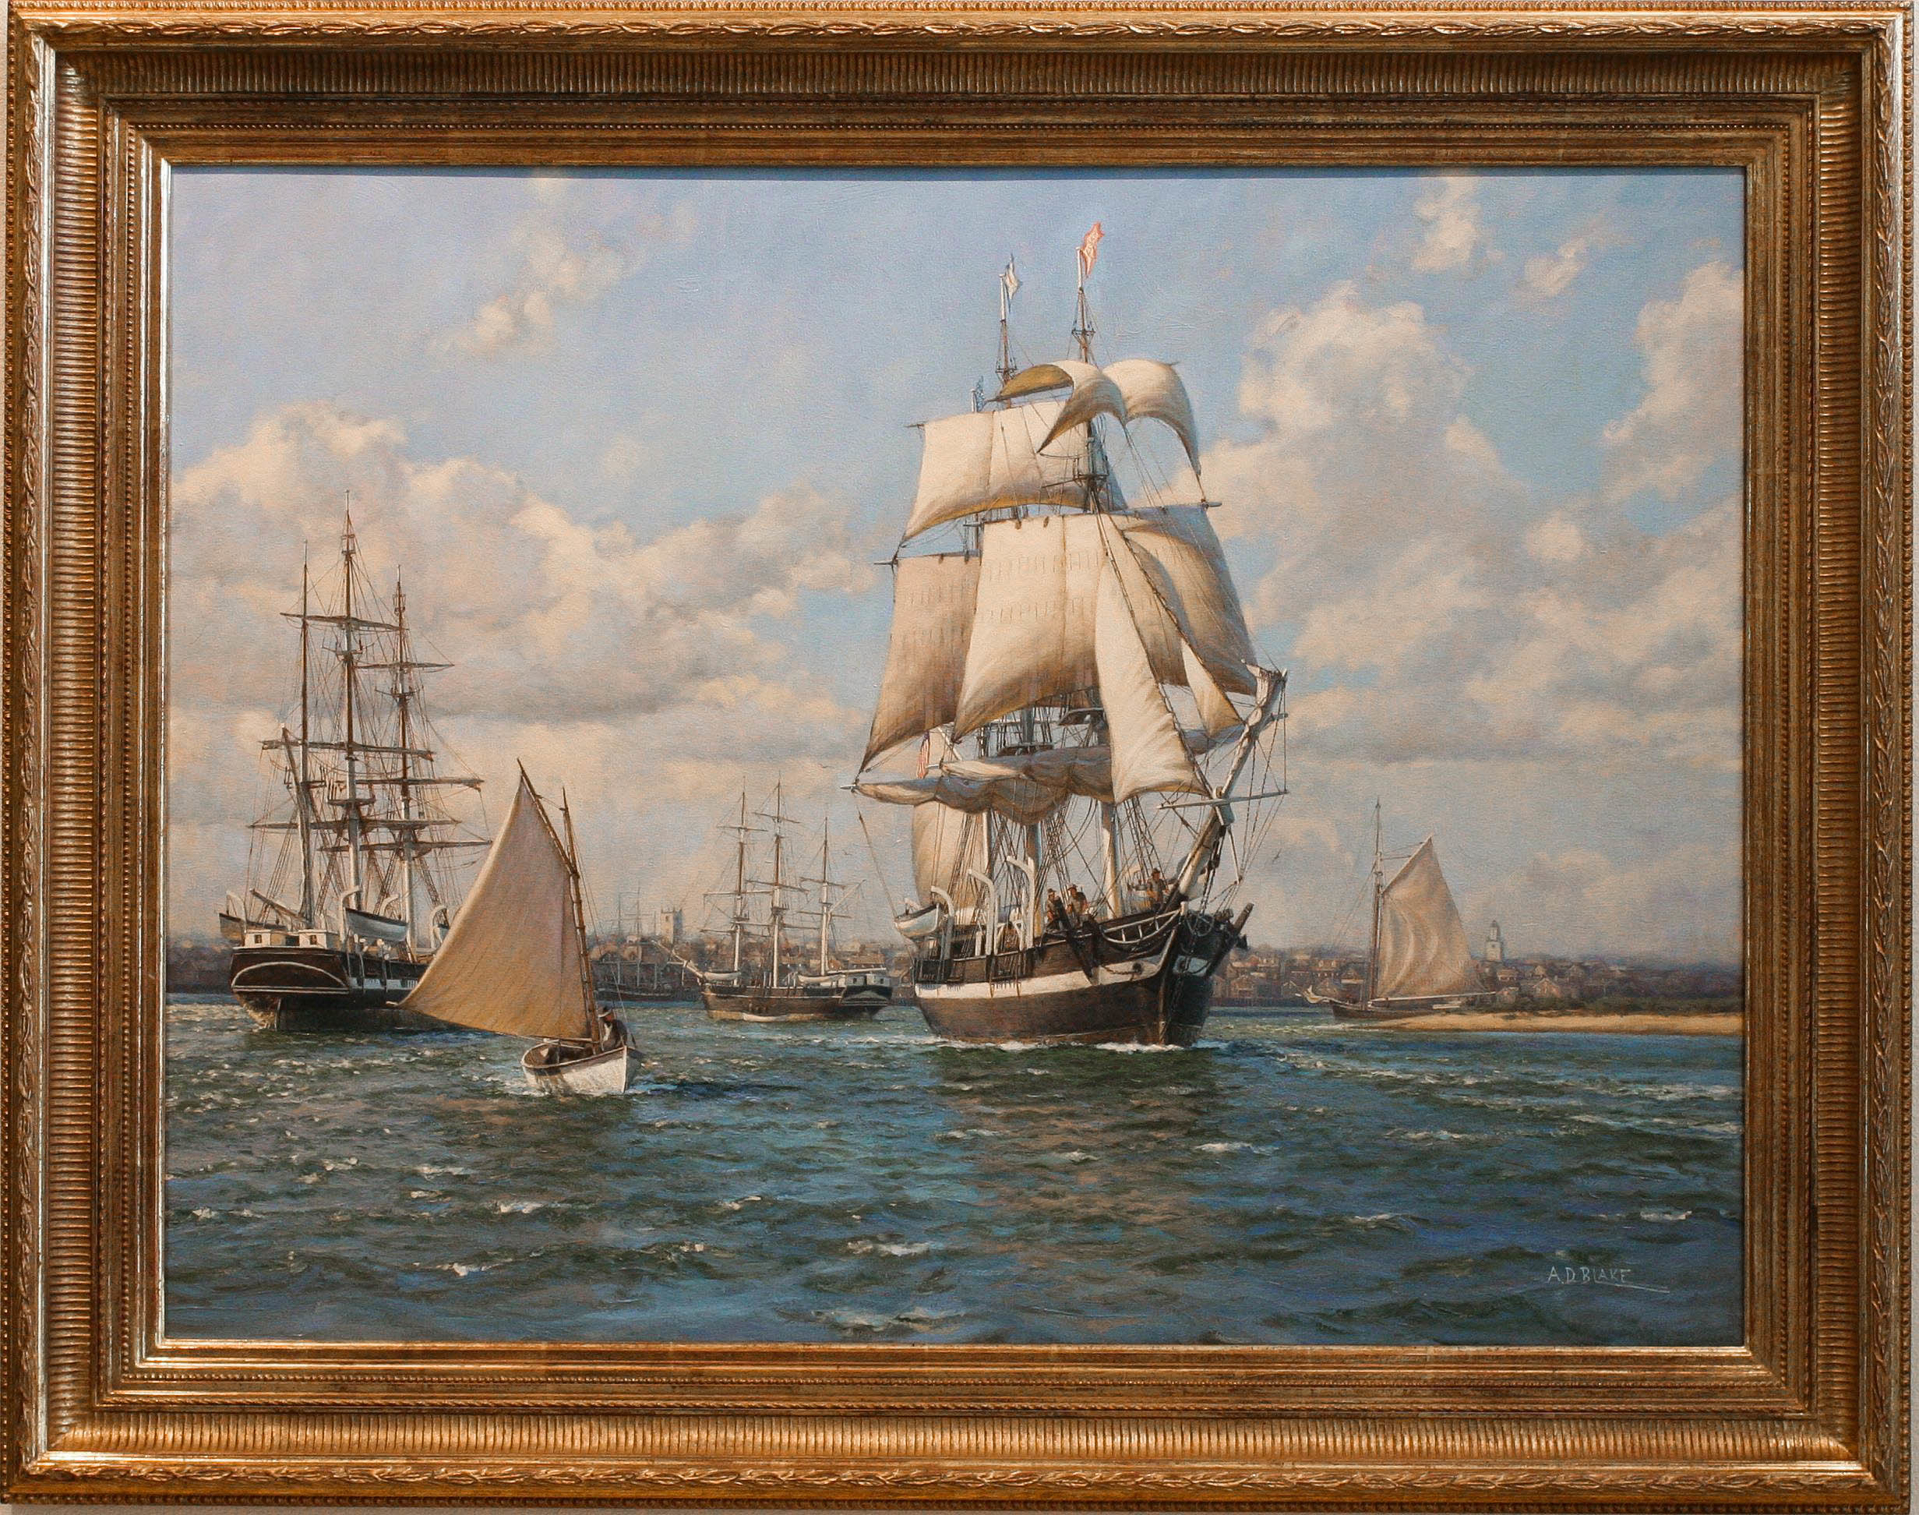 Whaler Essex Leaving on her Maiden Voyage by Anthony D. Blake